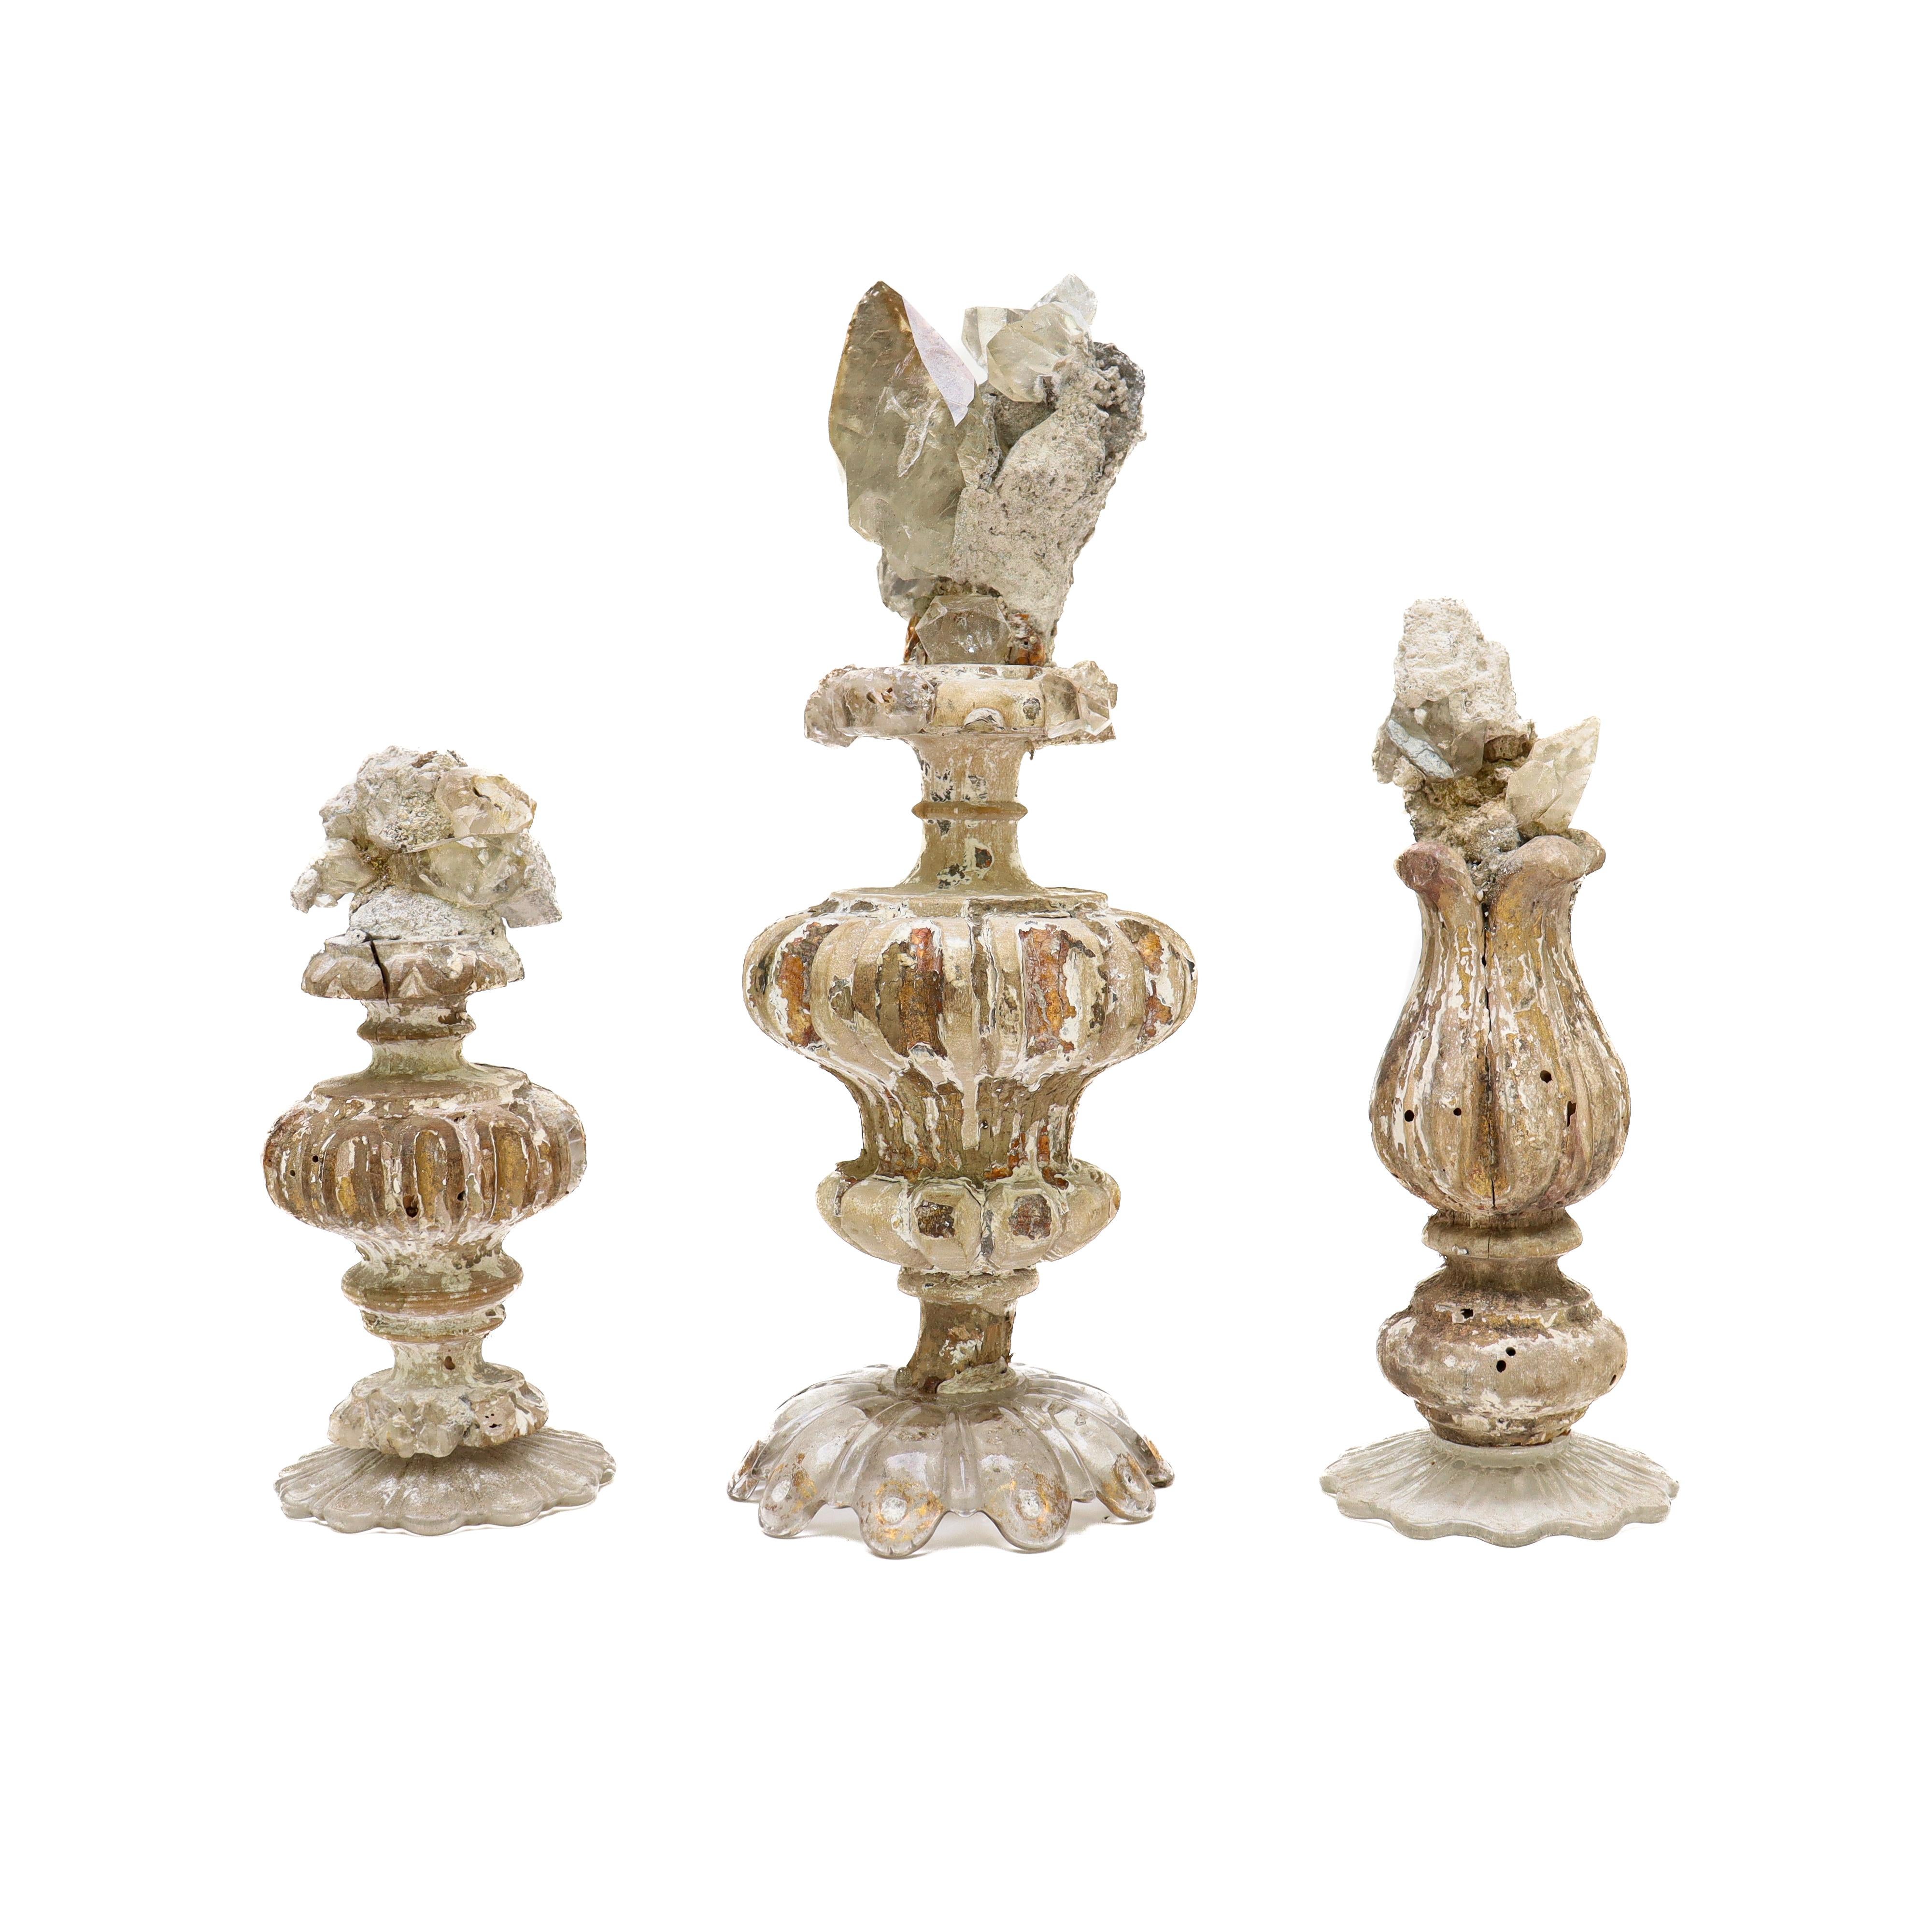 17th Century Italian fragments 'group of three' with a calcite crystals in matrix mounted on Italian glass bobeche bases. 

These fragments are from a church in Florence. They were found and saved from the historic flooding of the Arno River in